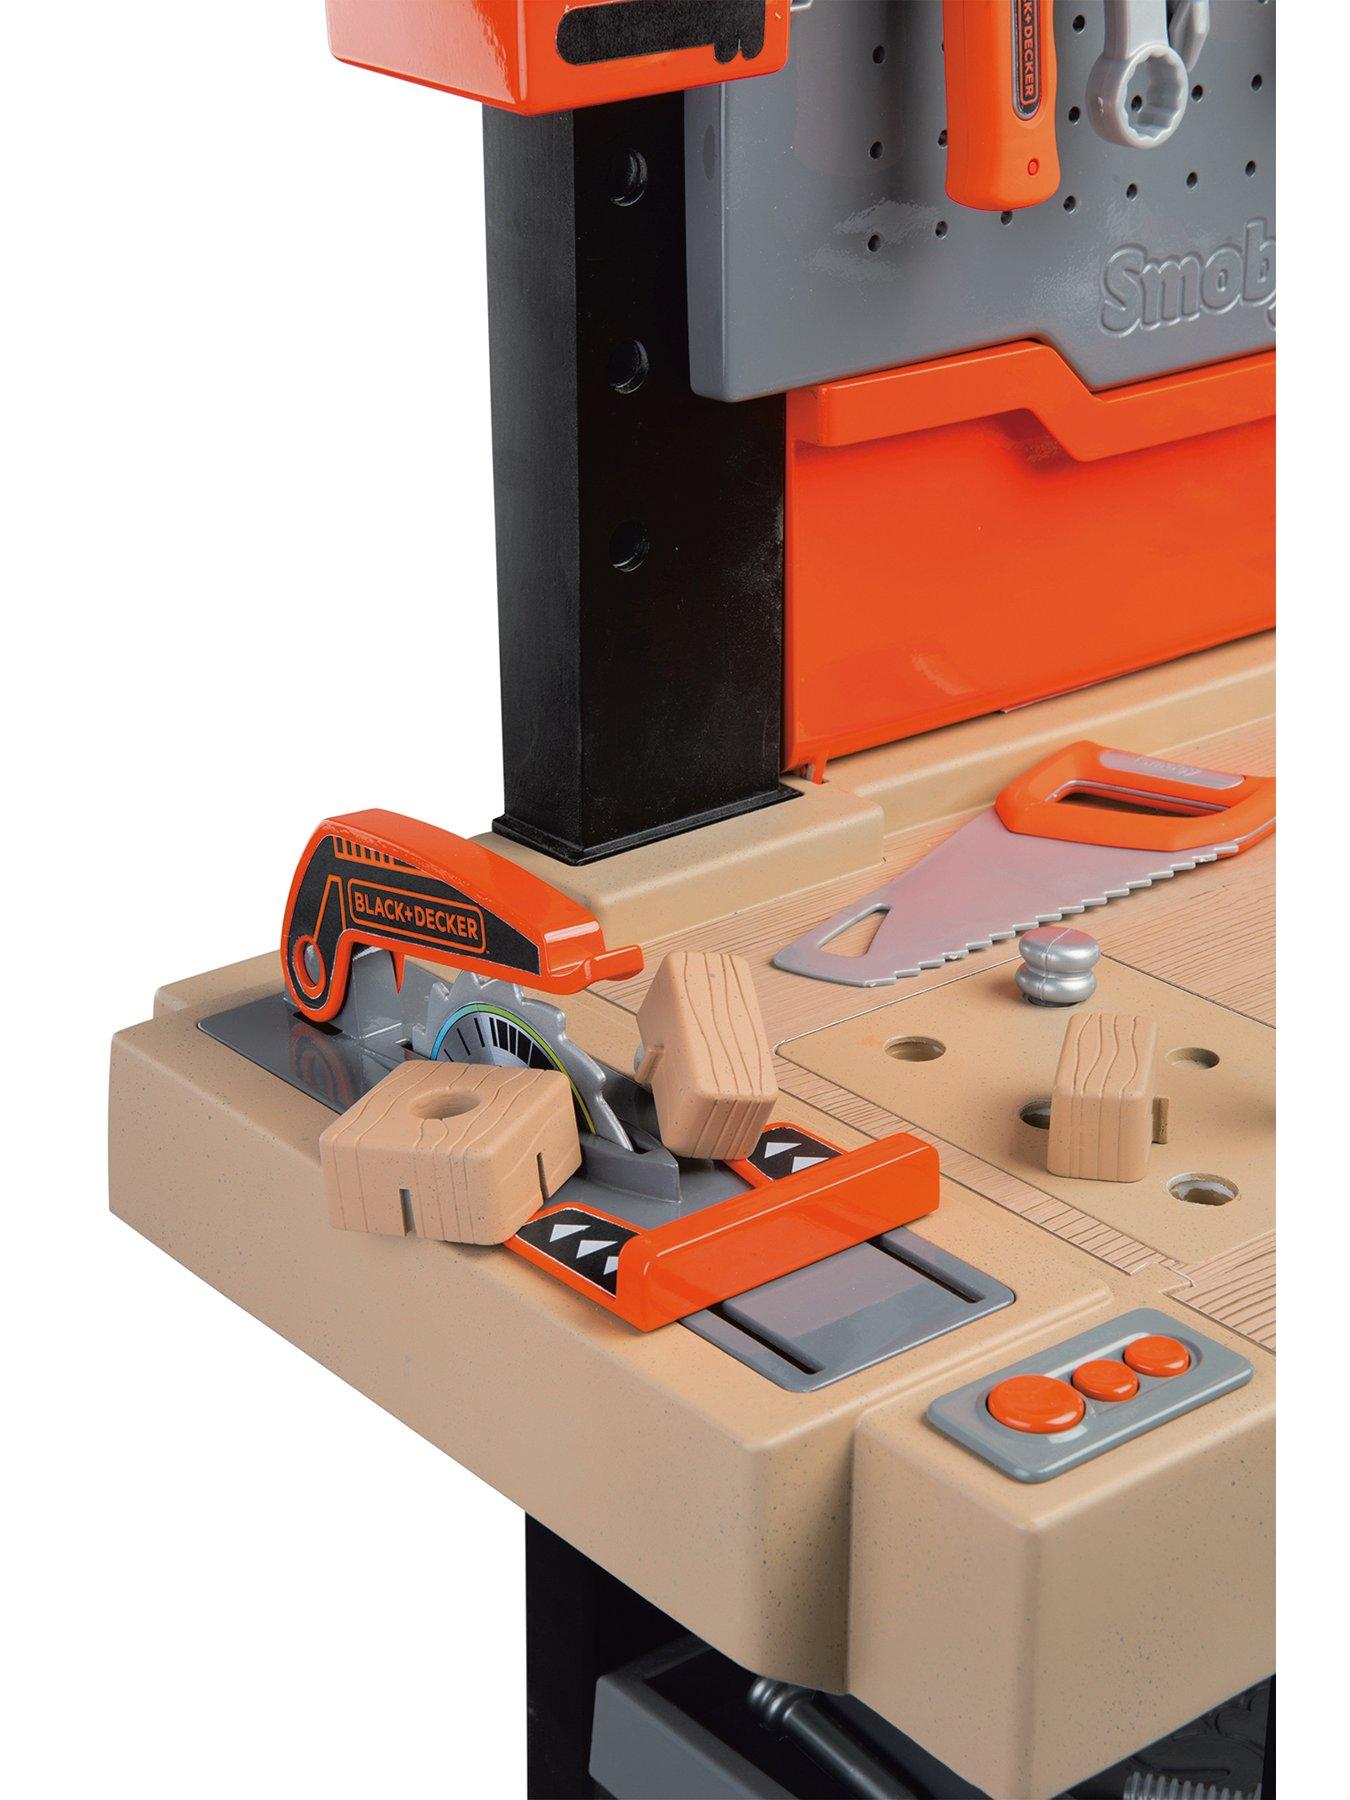 Black And Decker Kids' Workbench Review, by Thomas Smith